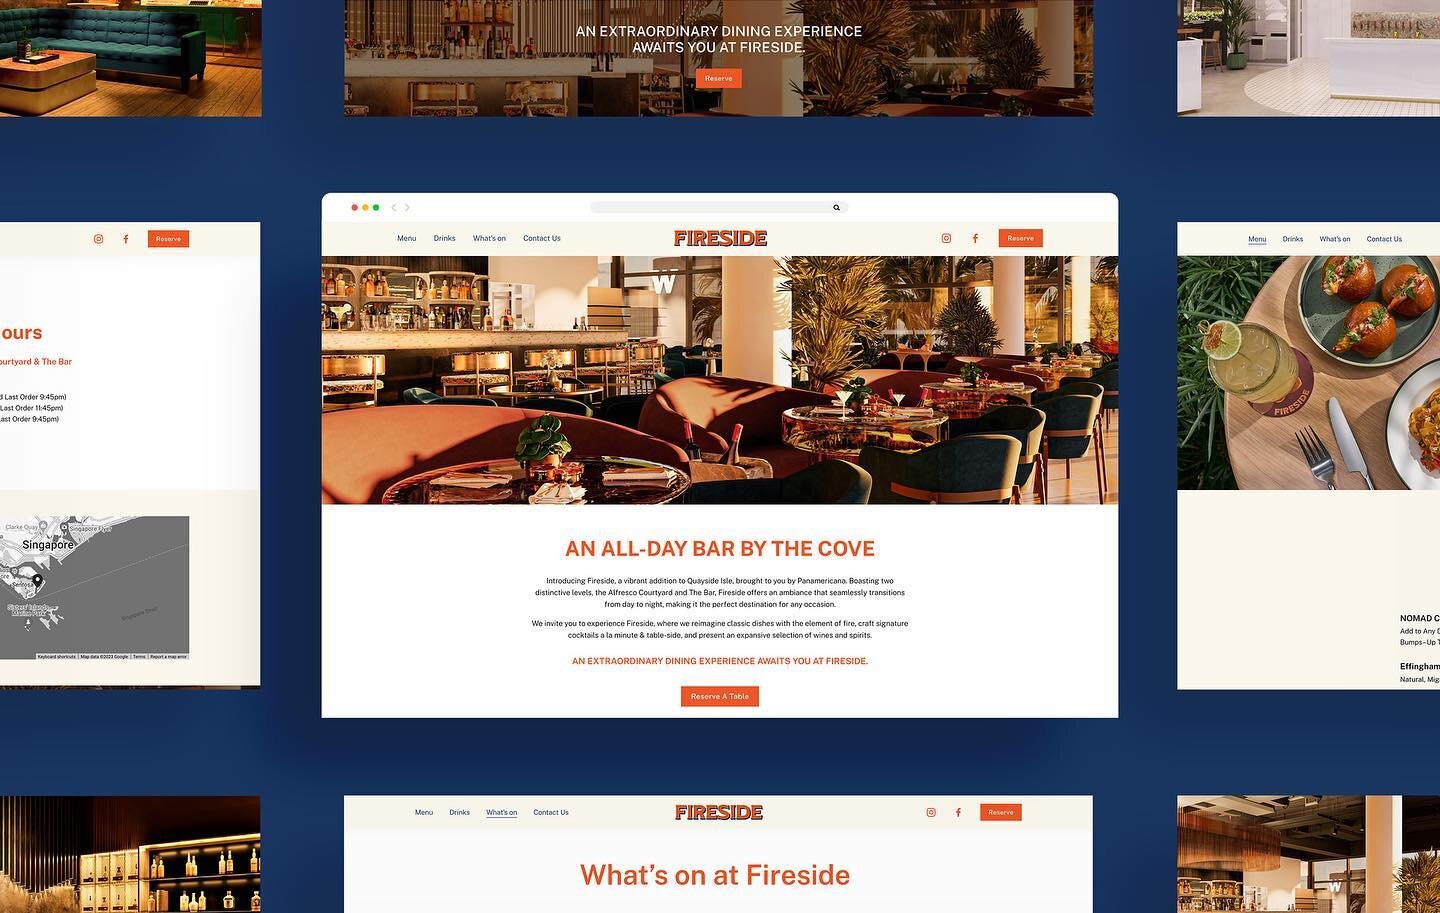 Fireside is a new all day bar concept by Panamericana. Studio Giraffe designed a website for the bar/restaurant. Find out more at the link in bio!

#websitedesign #singapore #design #webdesign #graphicdesign #userinterface #userexperience #visualcomm